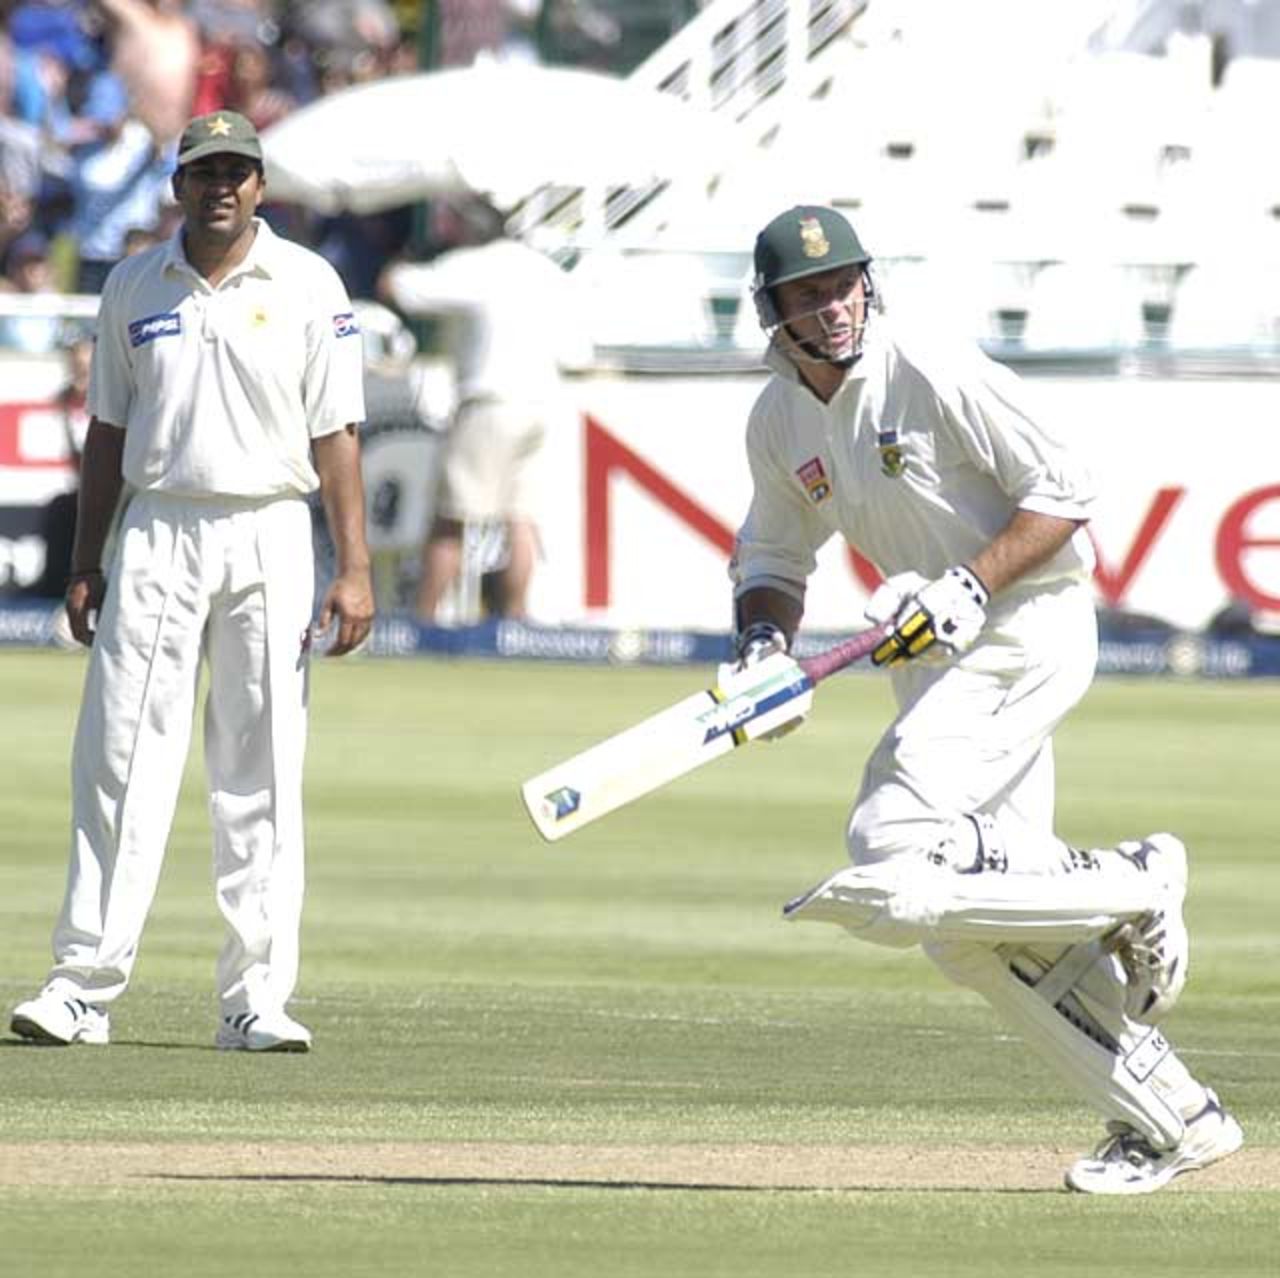 Graeme Smith sets off on his 100th run against Pakistan at Newlands